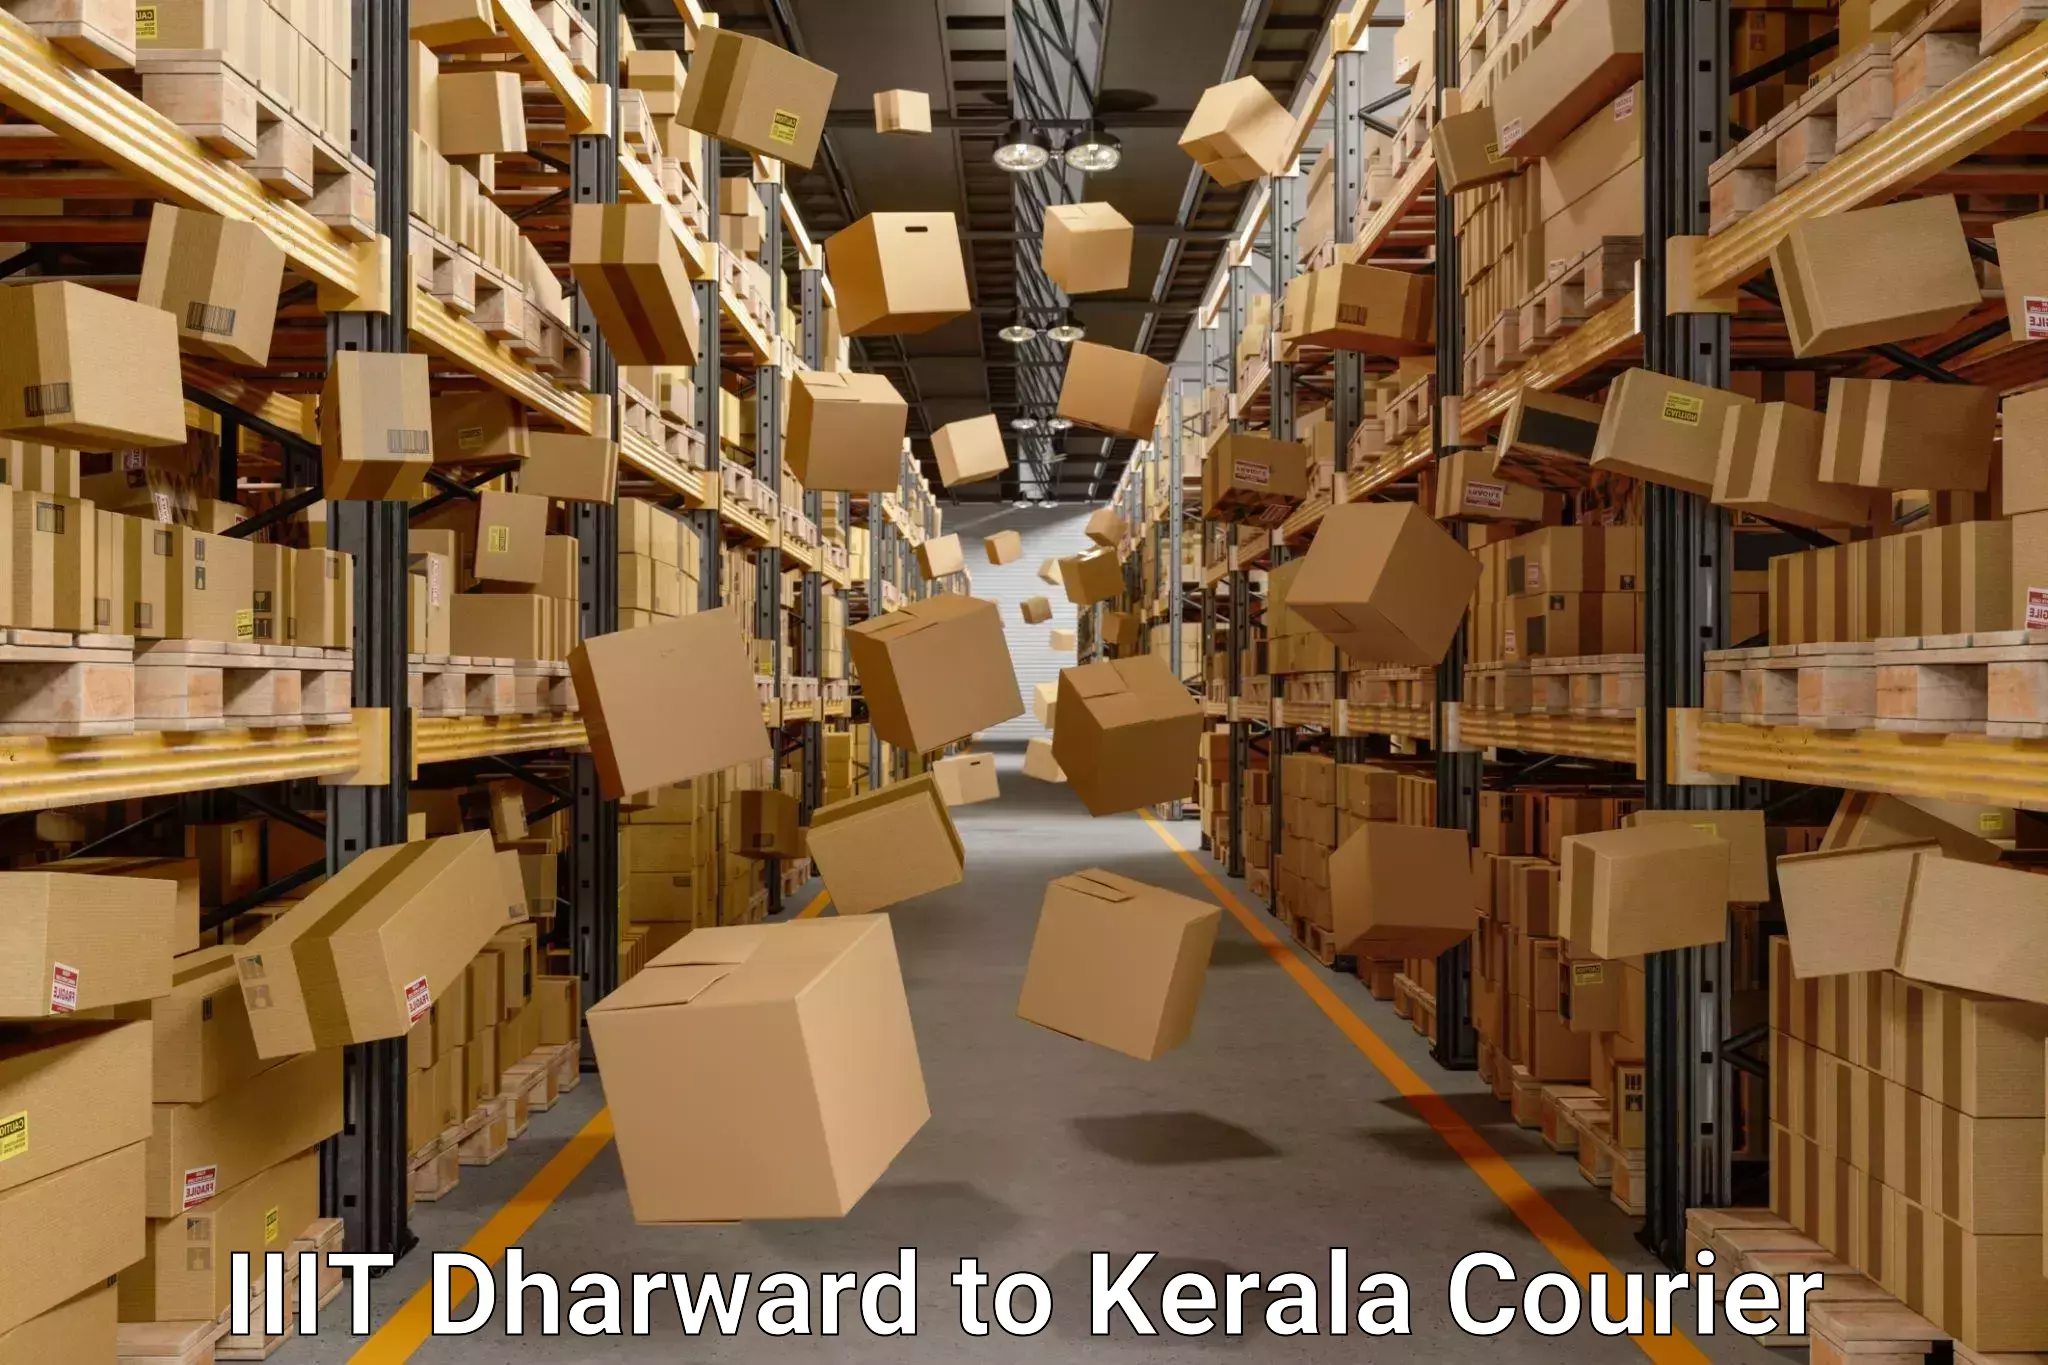 Trusted relocation experts IIIT Dharward to Kerala